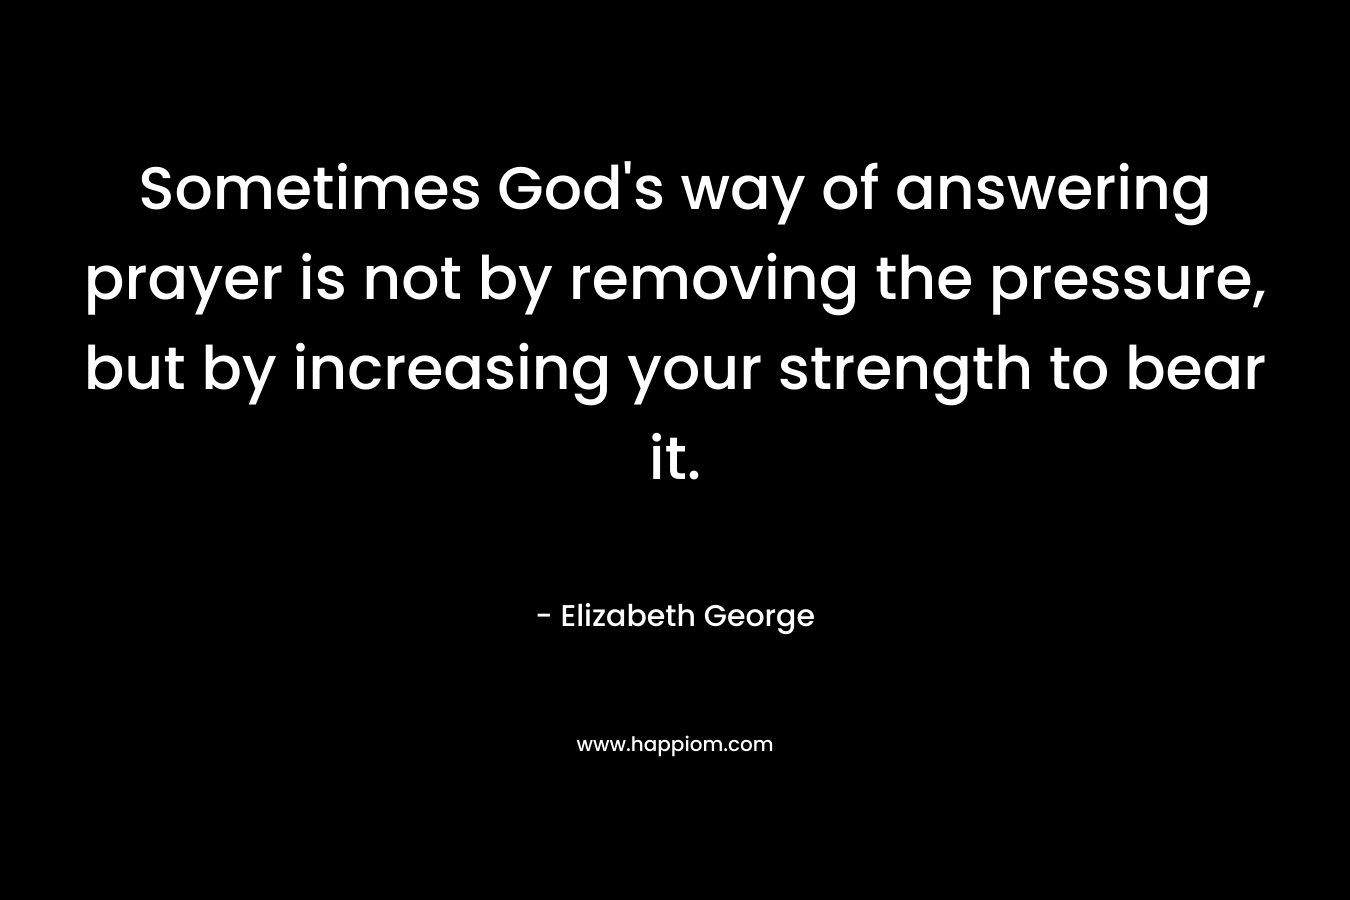 Sometimes God's way of answering prayer is not by removing the pressure, but by increasing your strength to bear it.